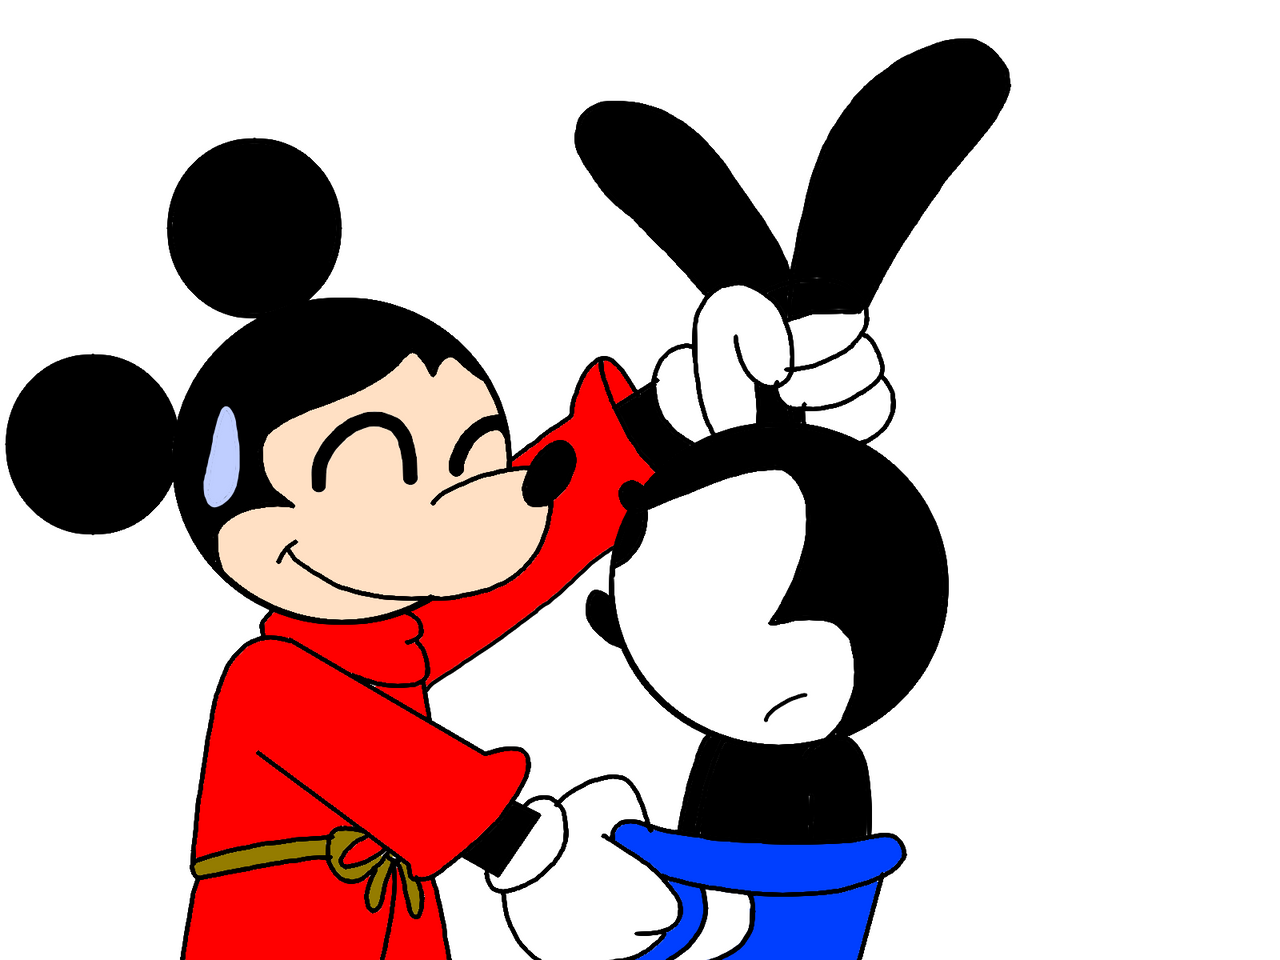 sorcerer mickey hat clipart - photo #36